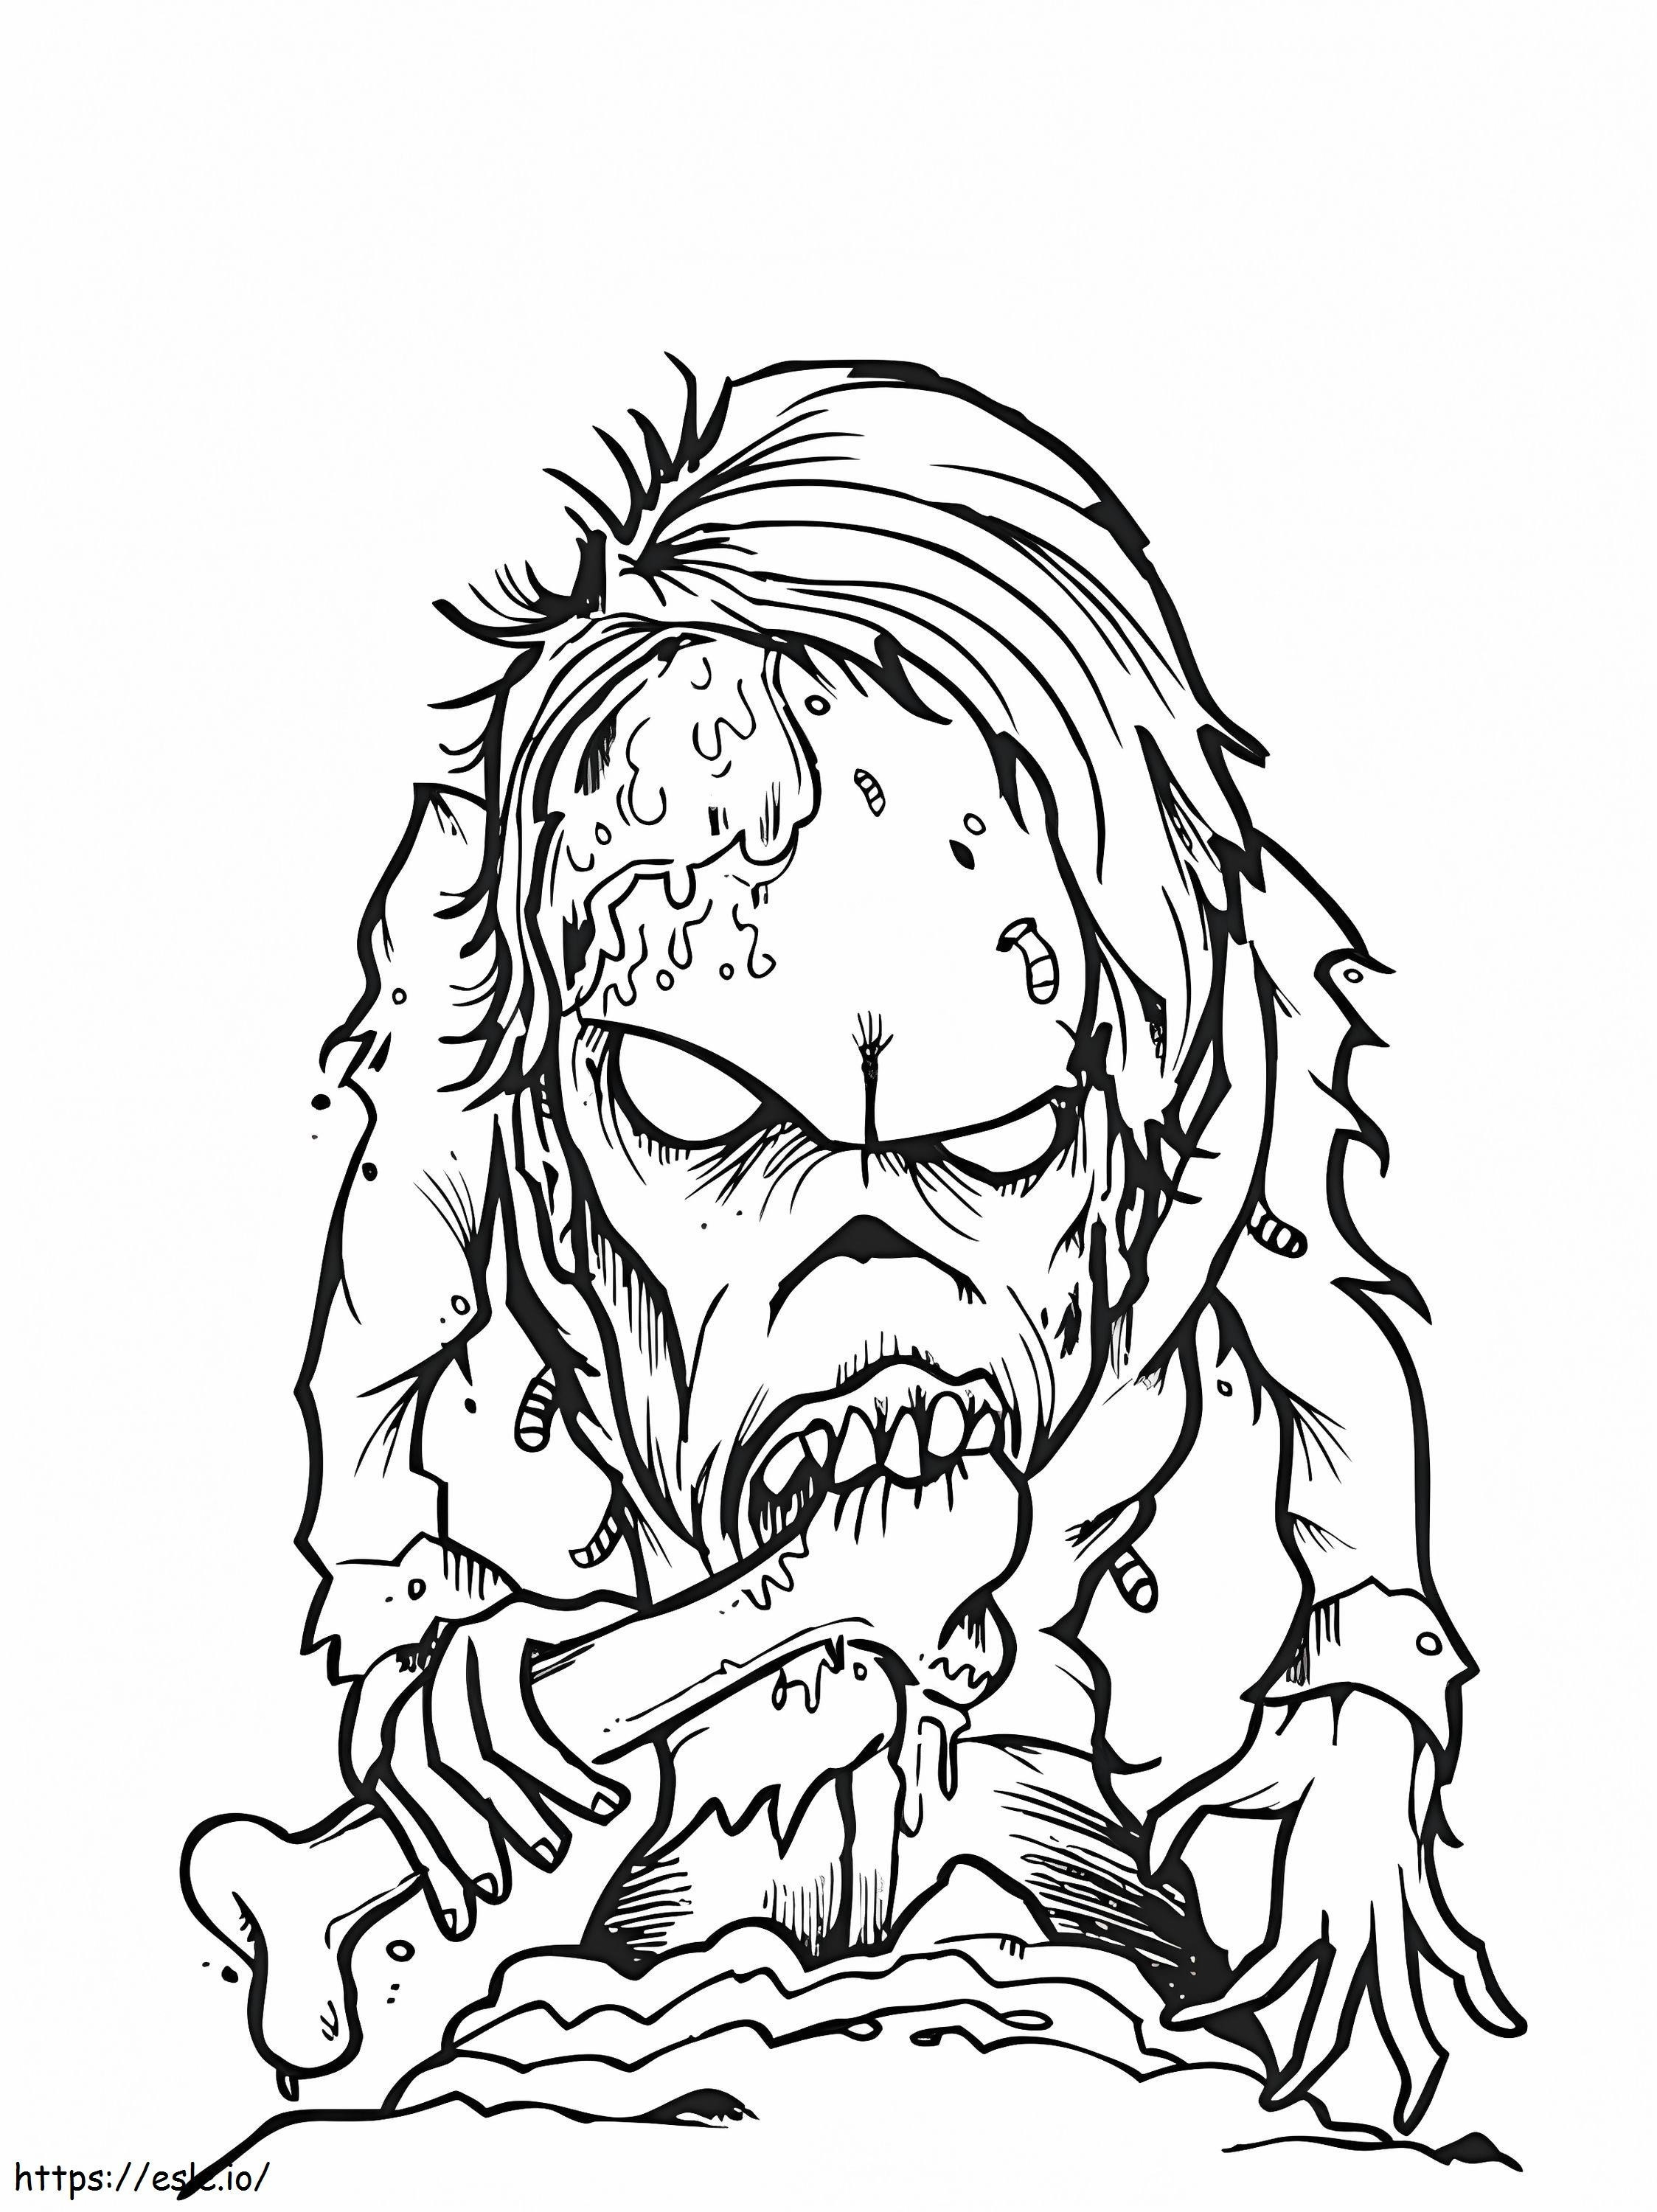 Zombie Eating Bone coloring page